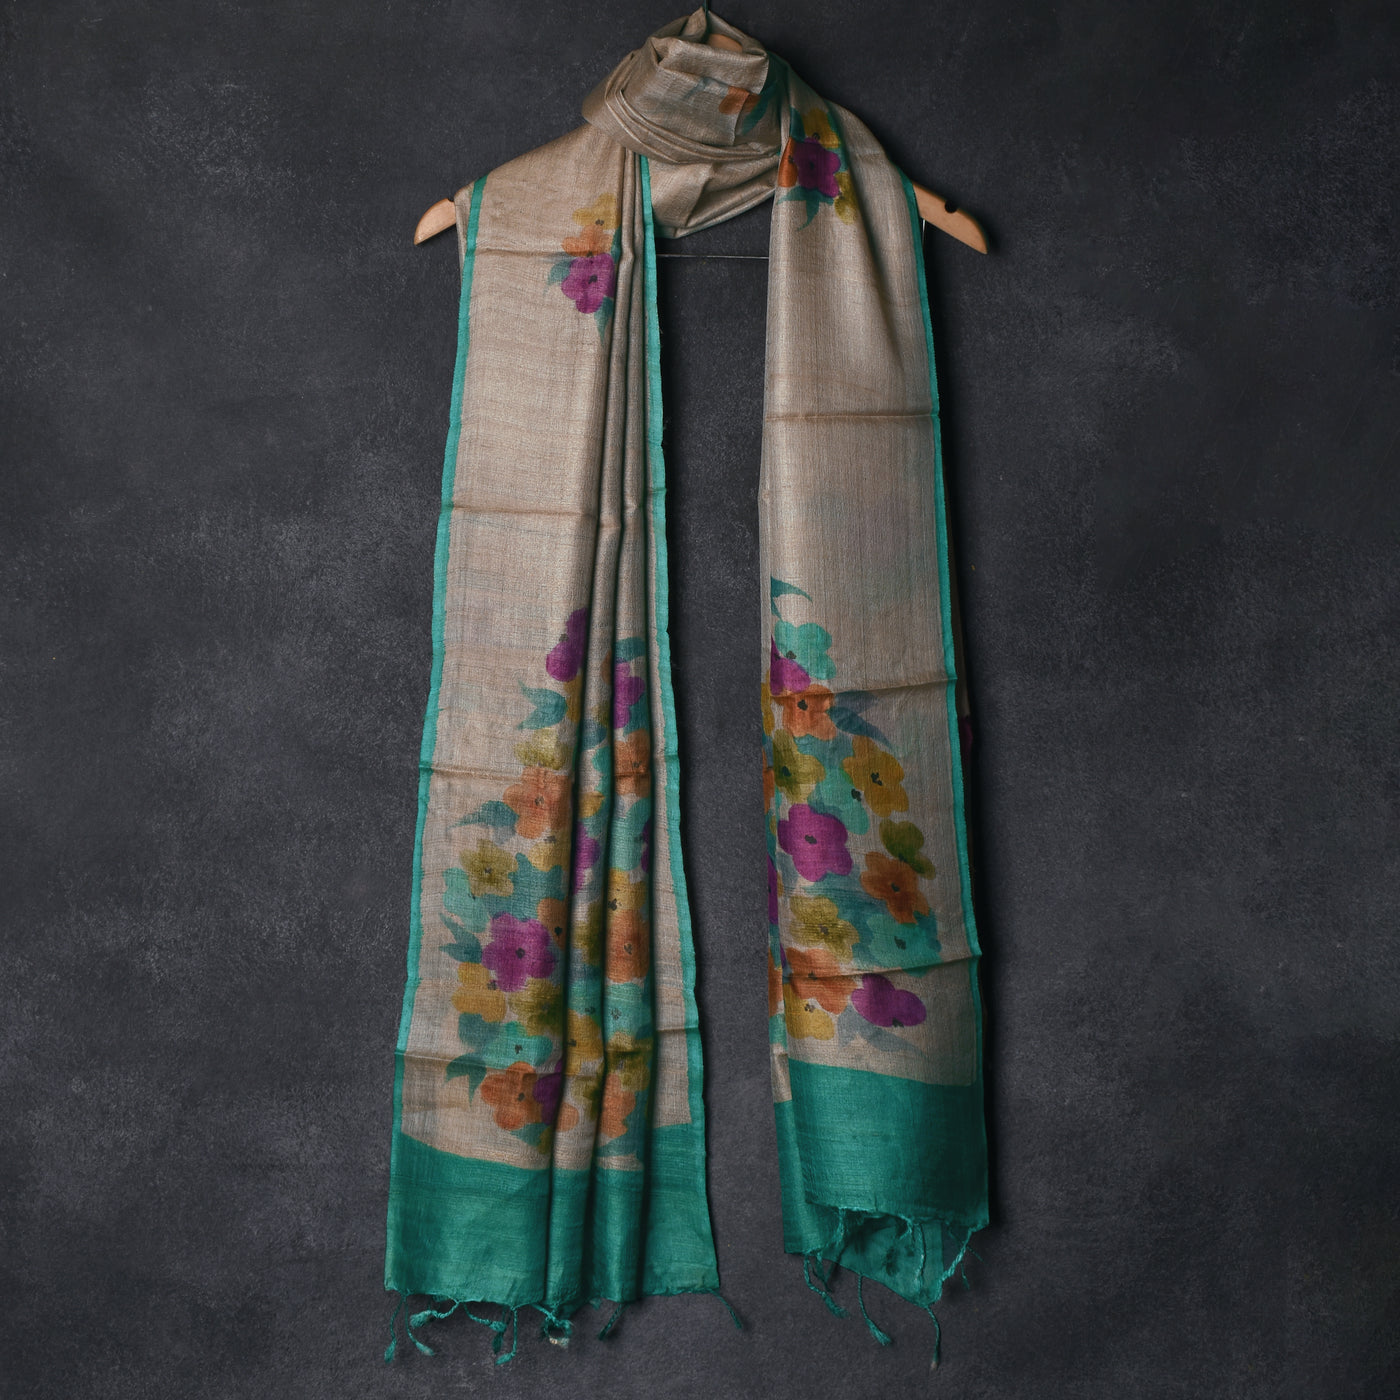 Off White Tussar Silk Dupatta with Floral Printed Design